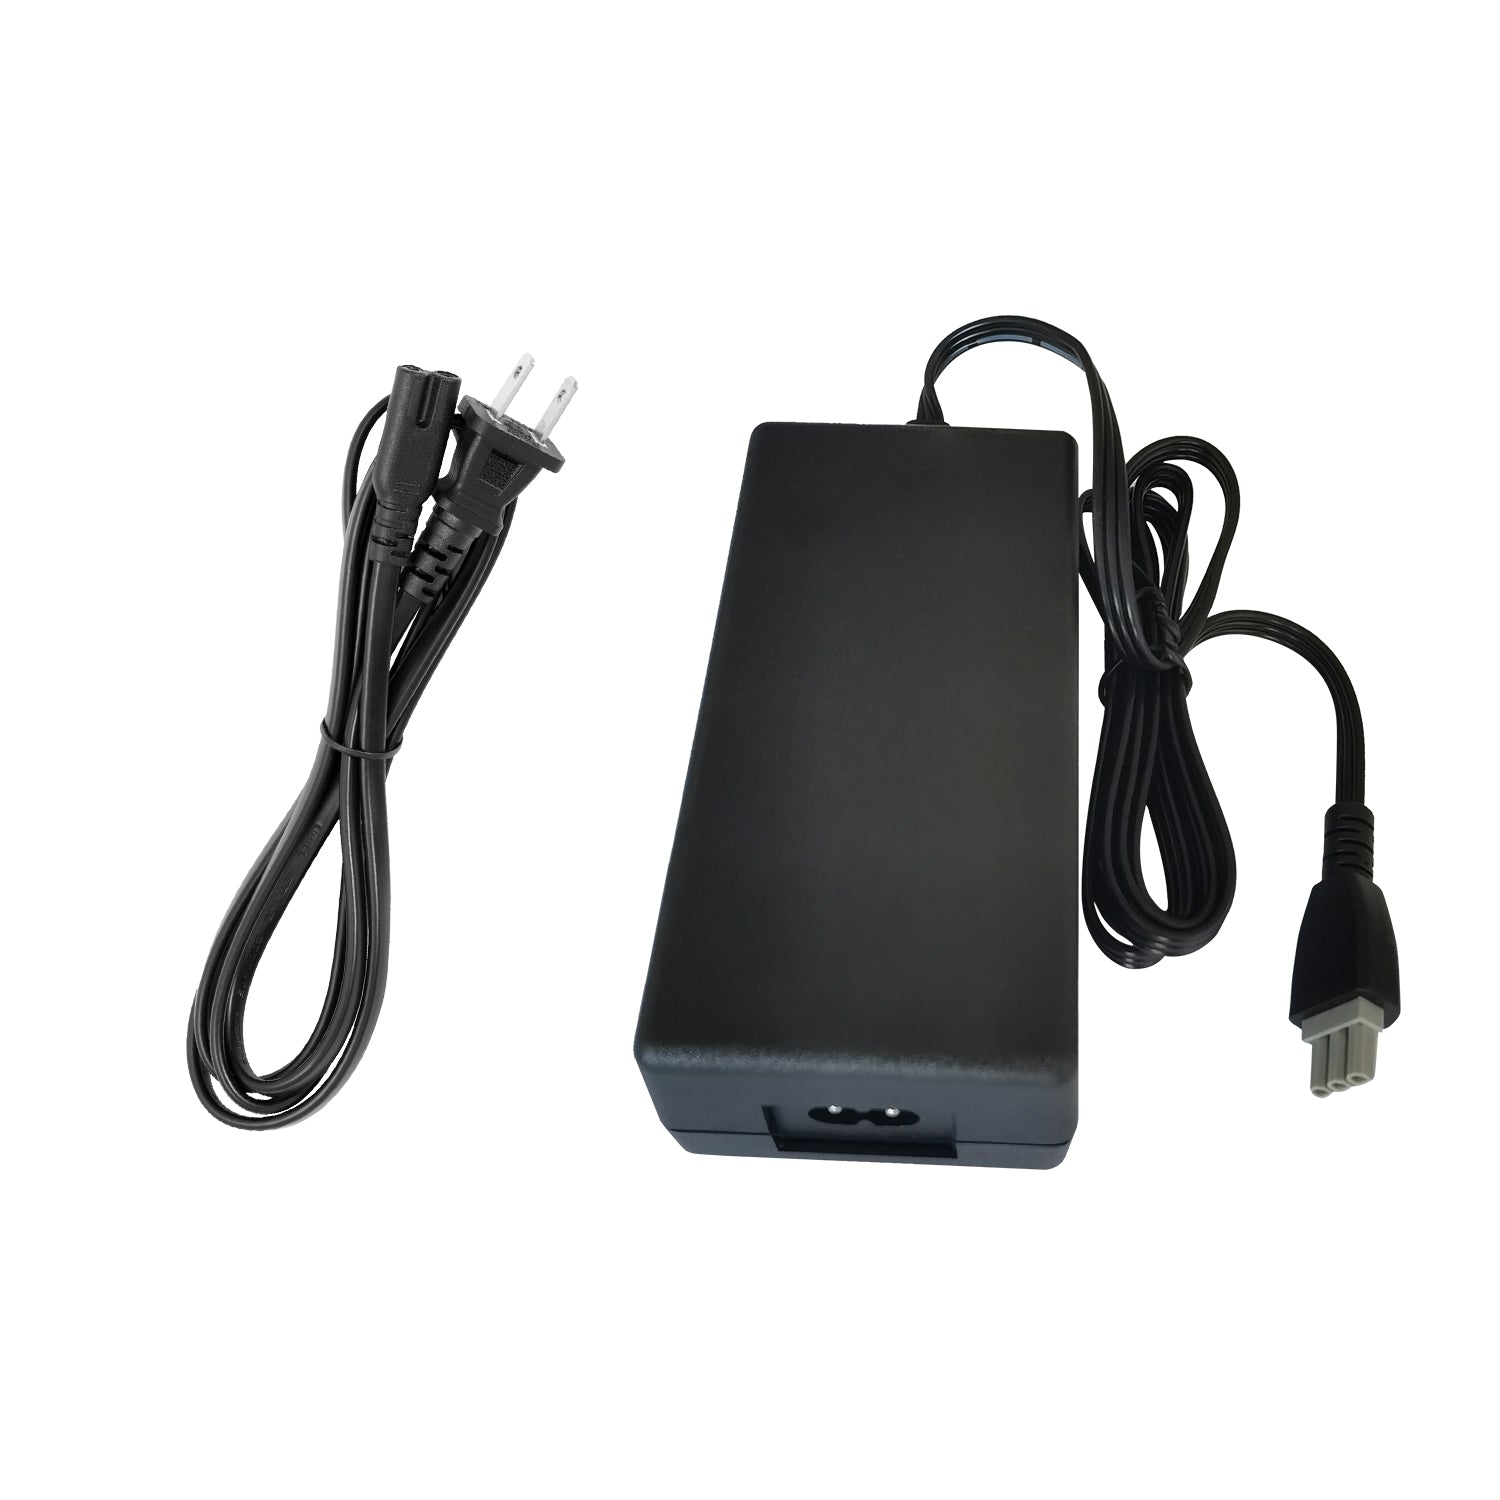 Power Adapter for hp psc 1510s Printer.